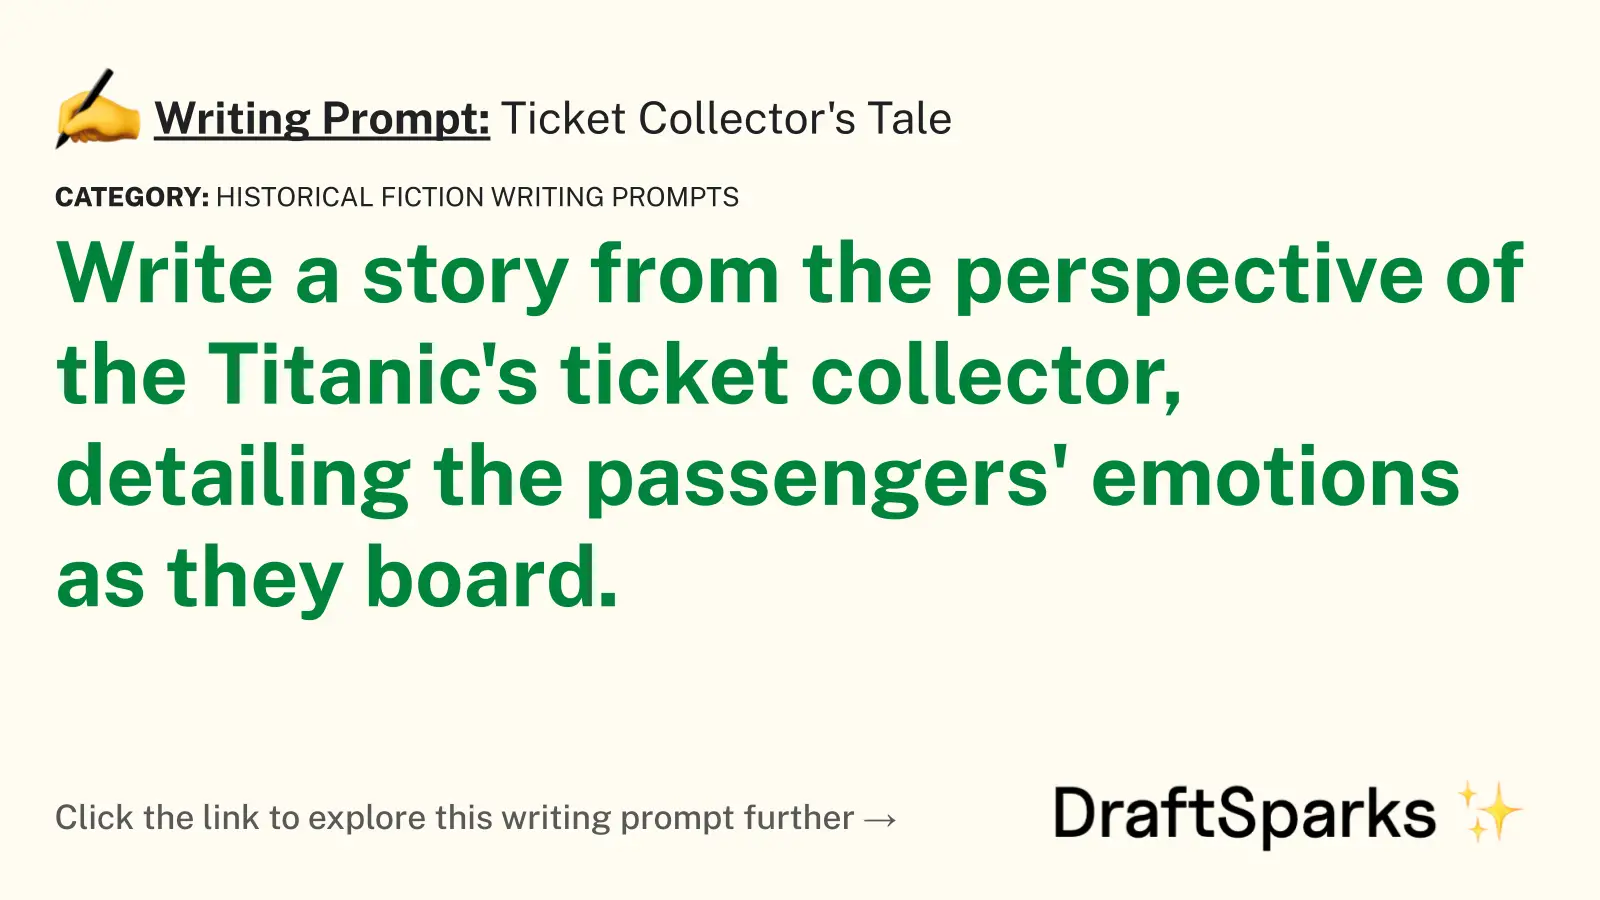 Ticket Collector’s Tale